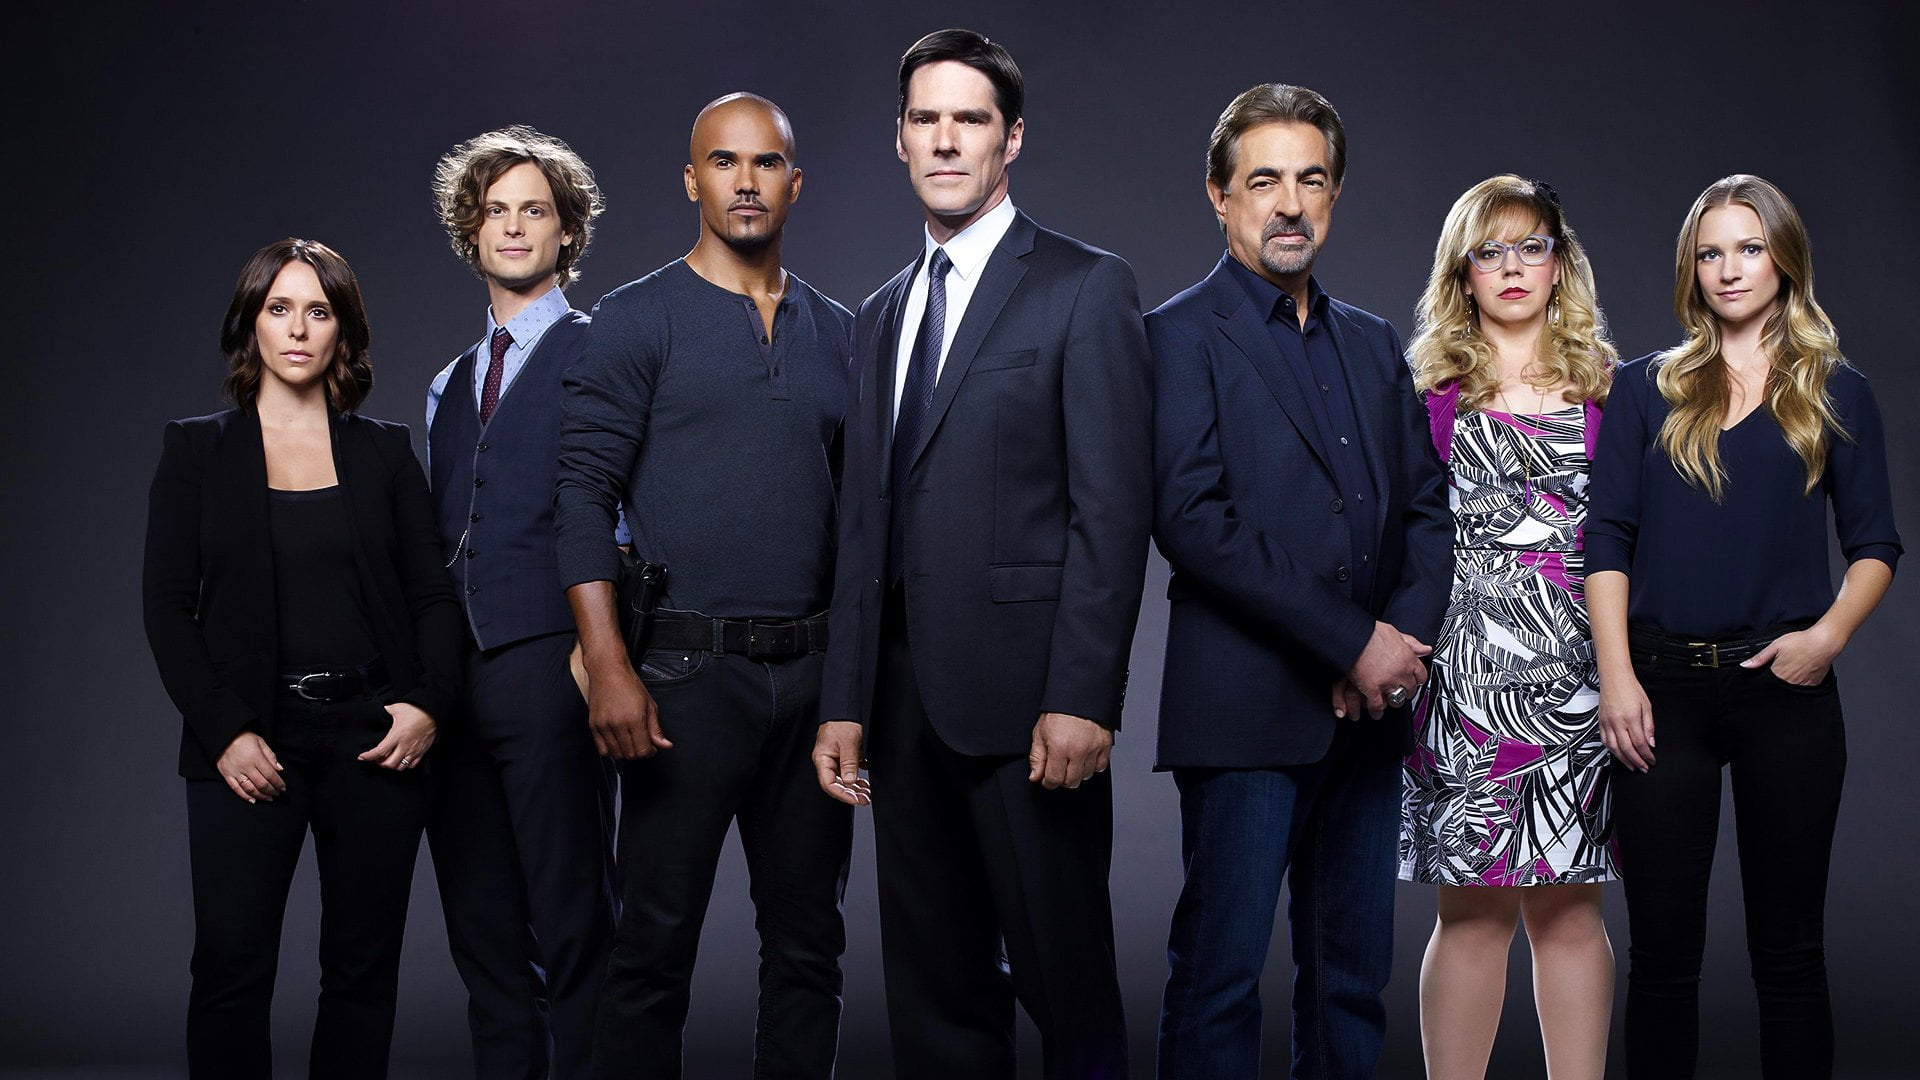 TV Show, Criminal Minds, group of people, standing, women, adult